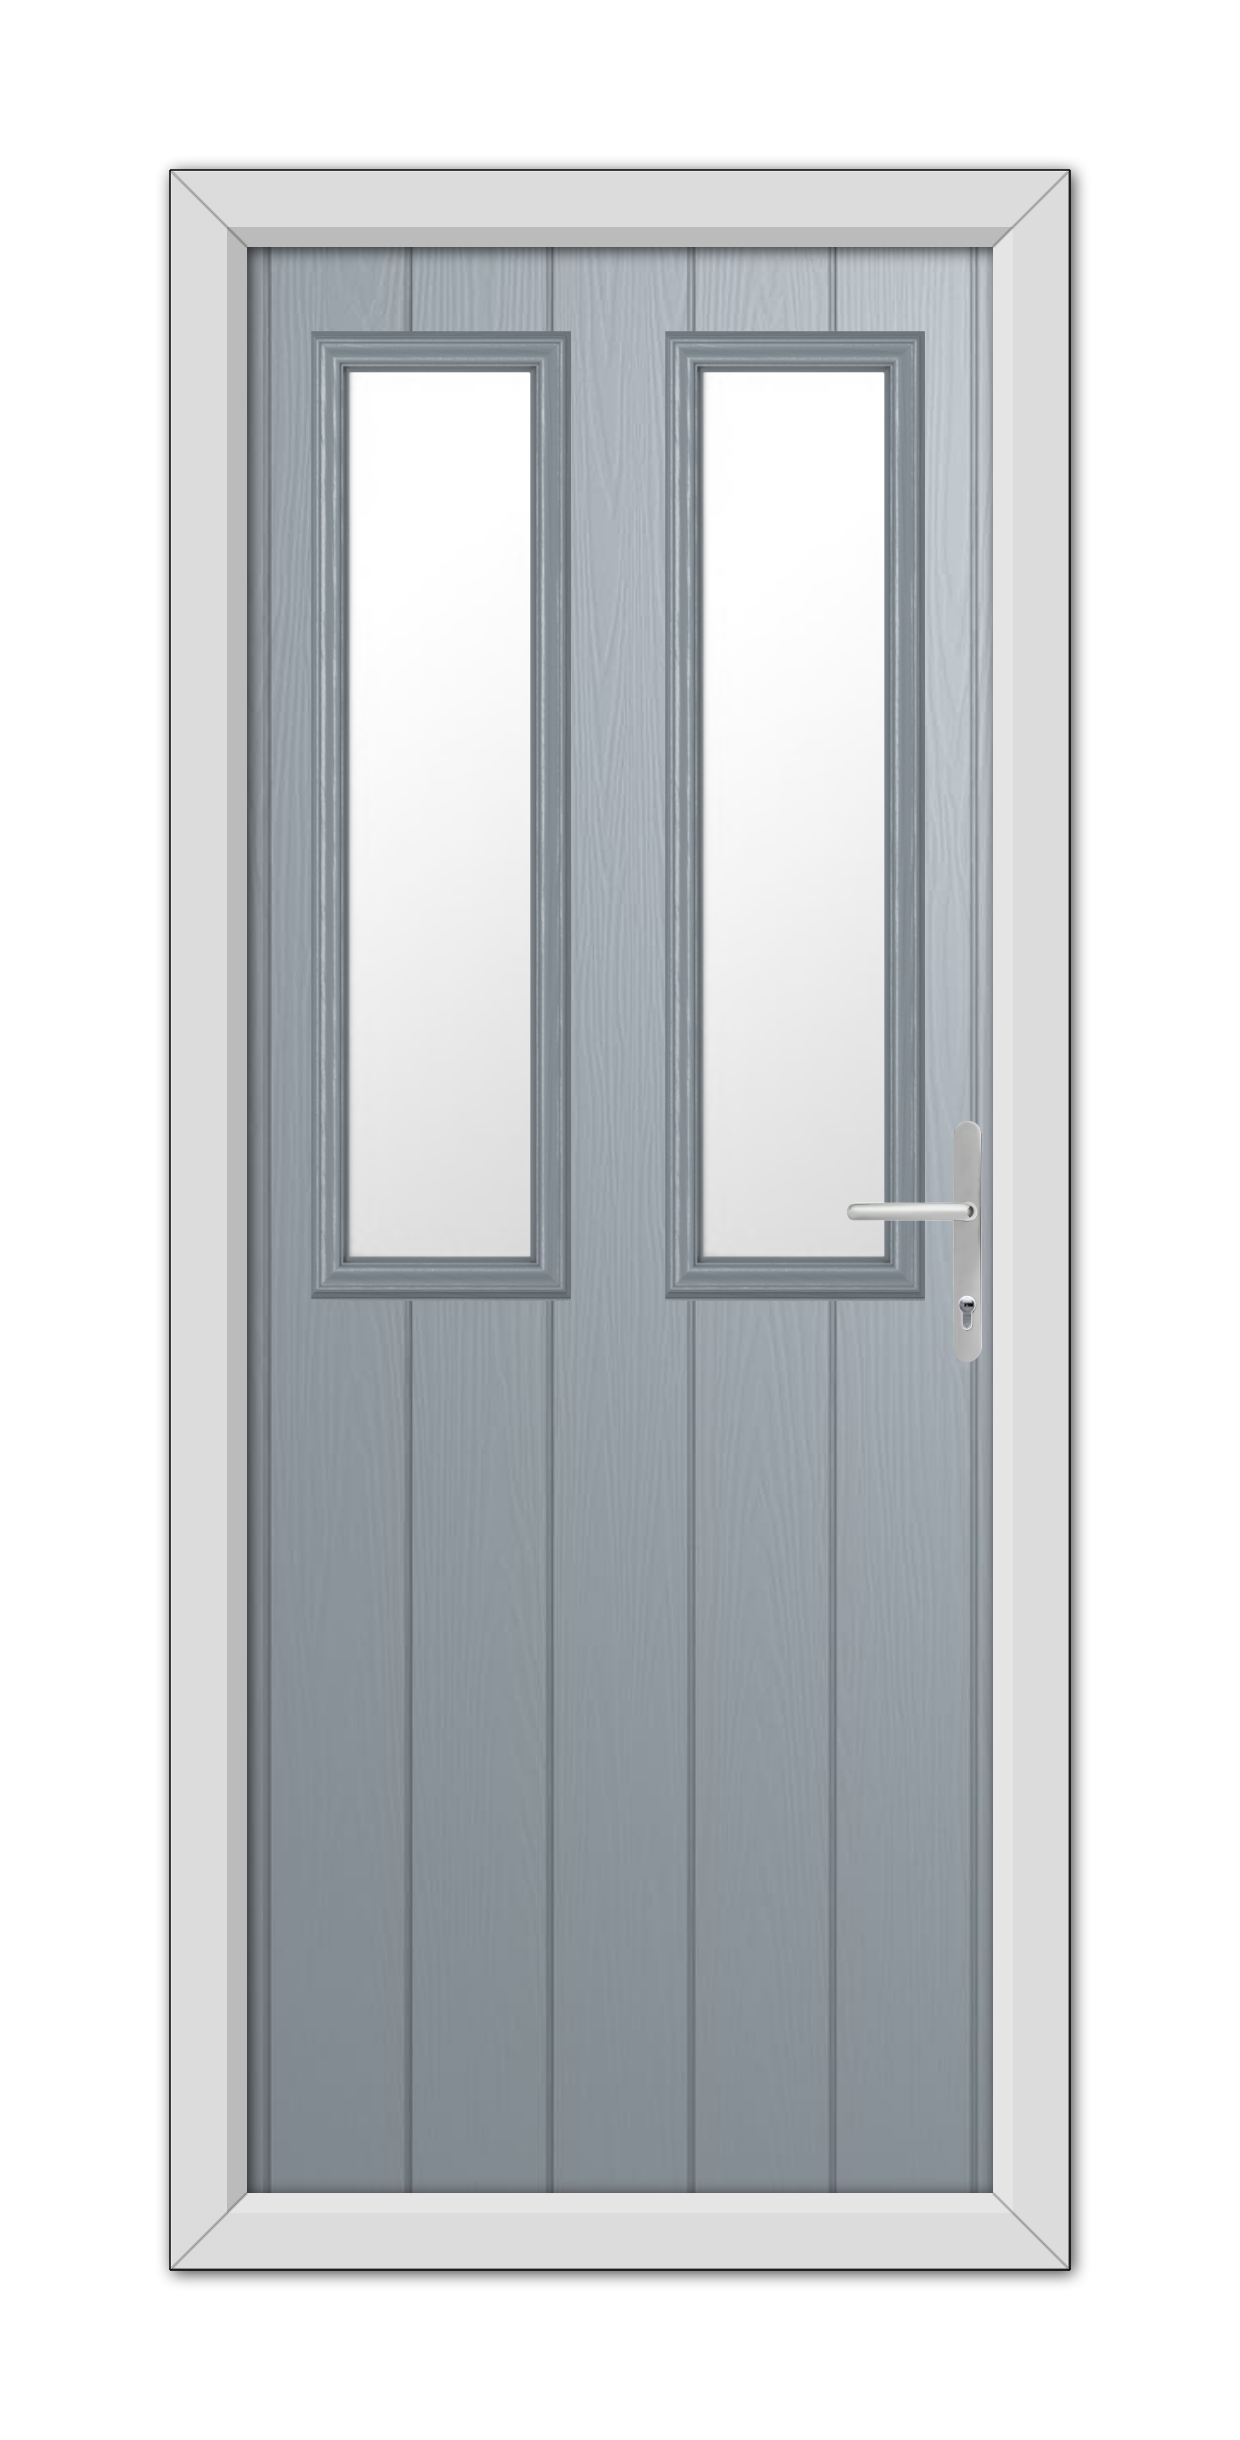 French Grey Wellington Composite Door 48mm Timber Core with a long rectangular glass windows, featuring a modern handle on the right side.